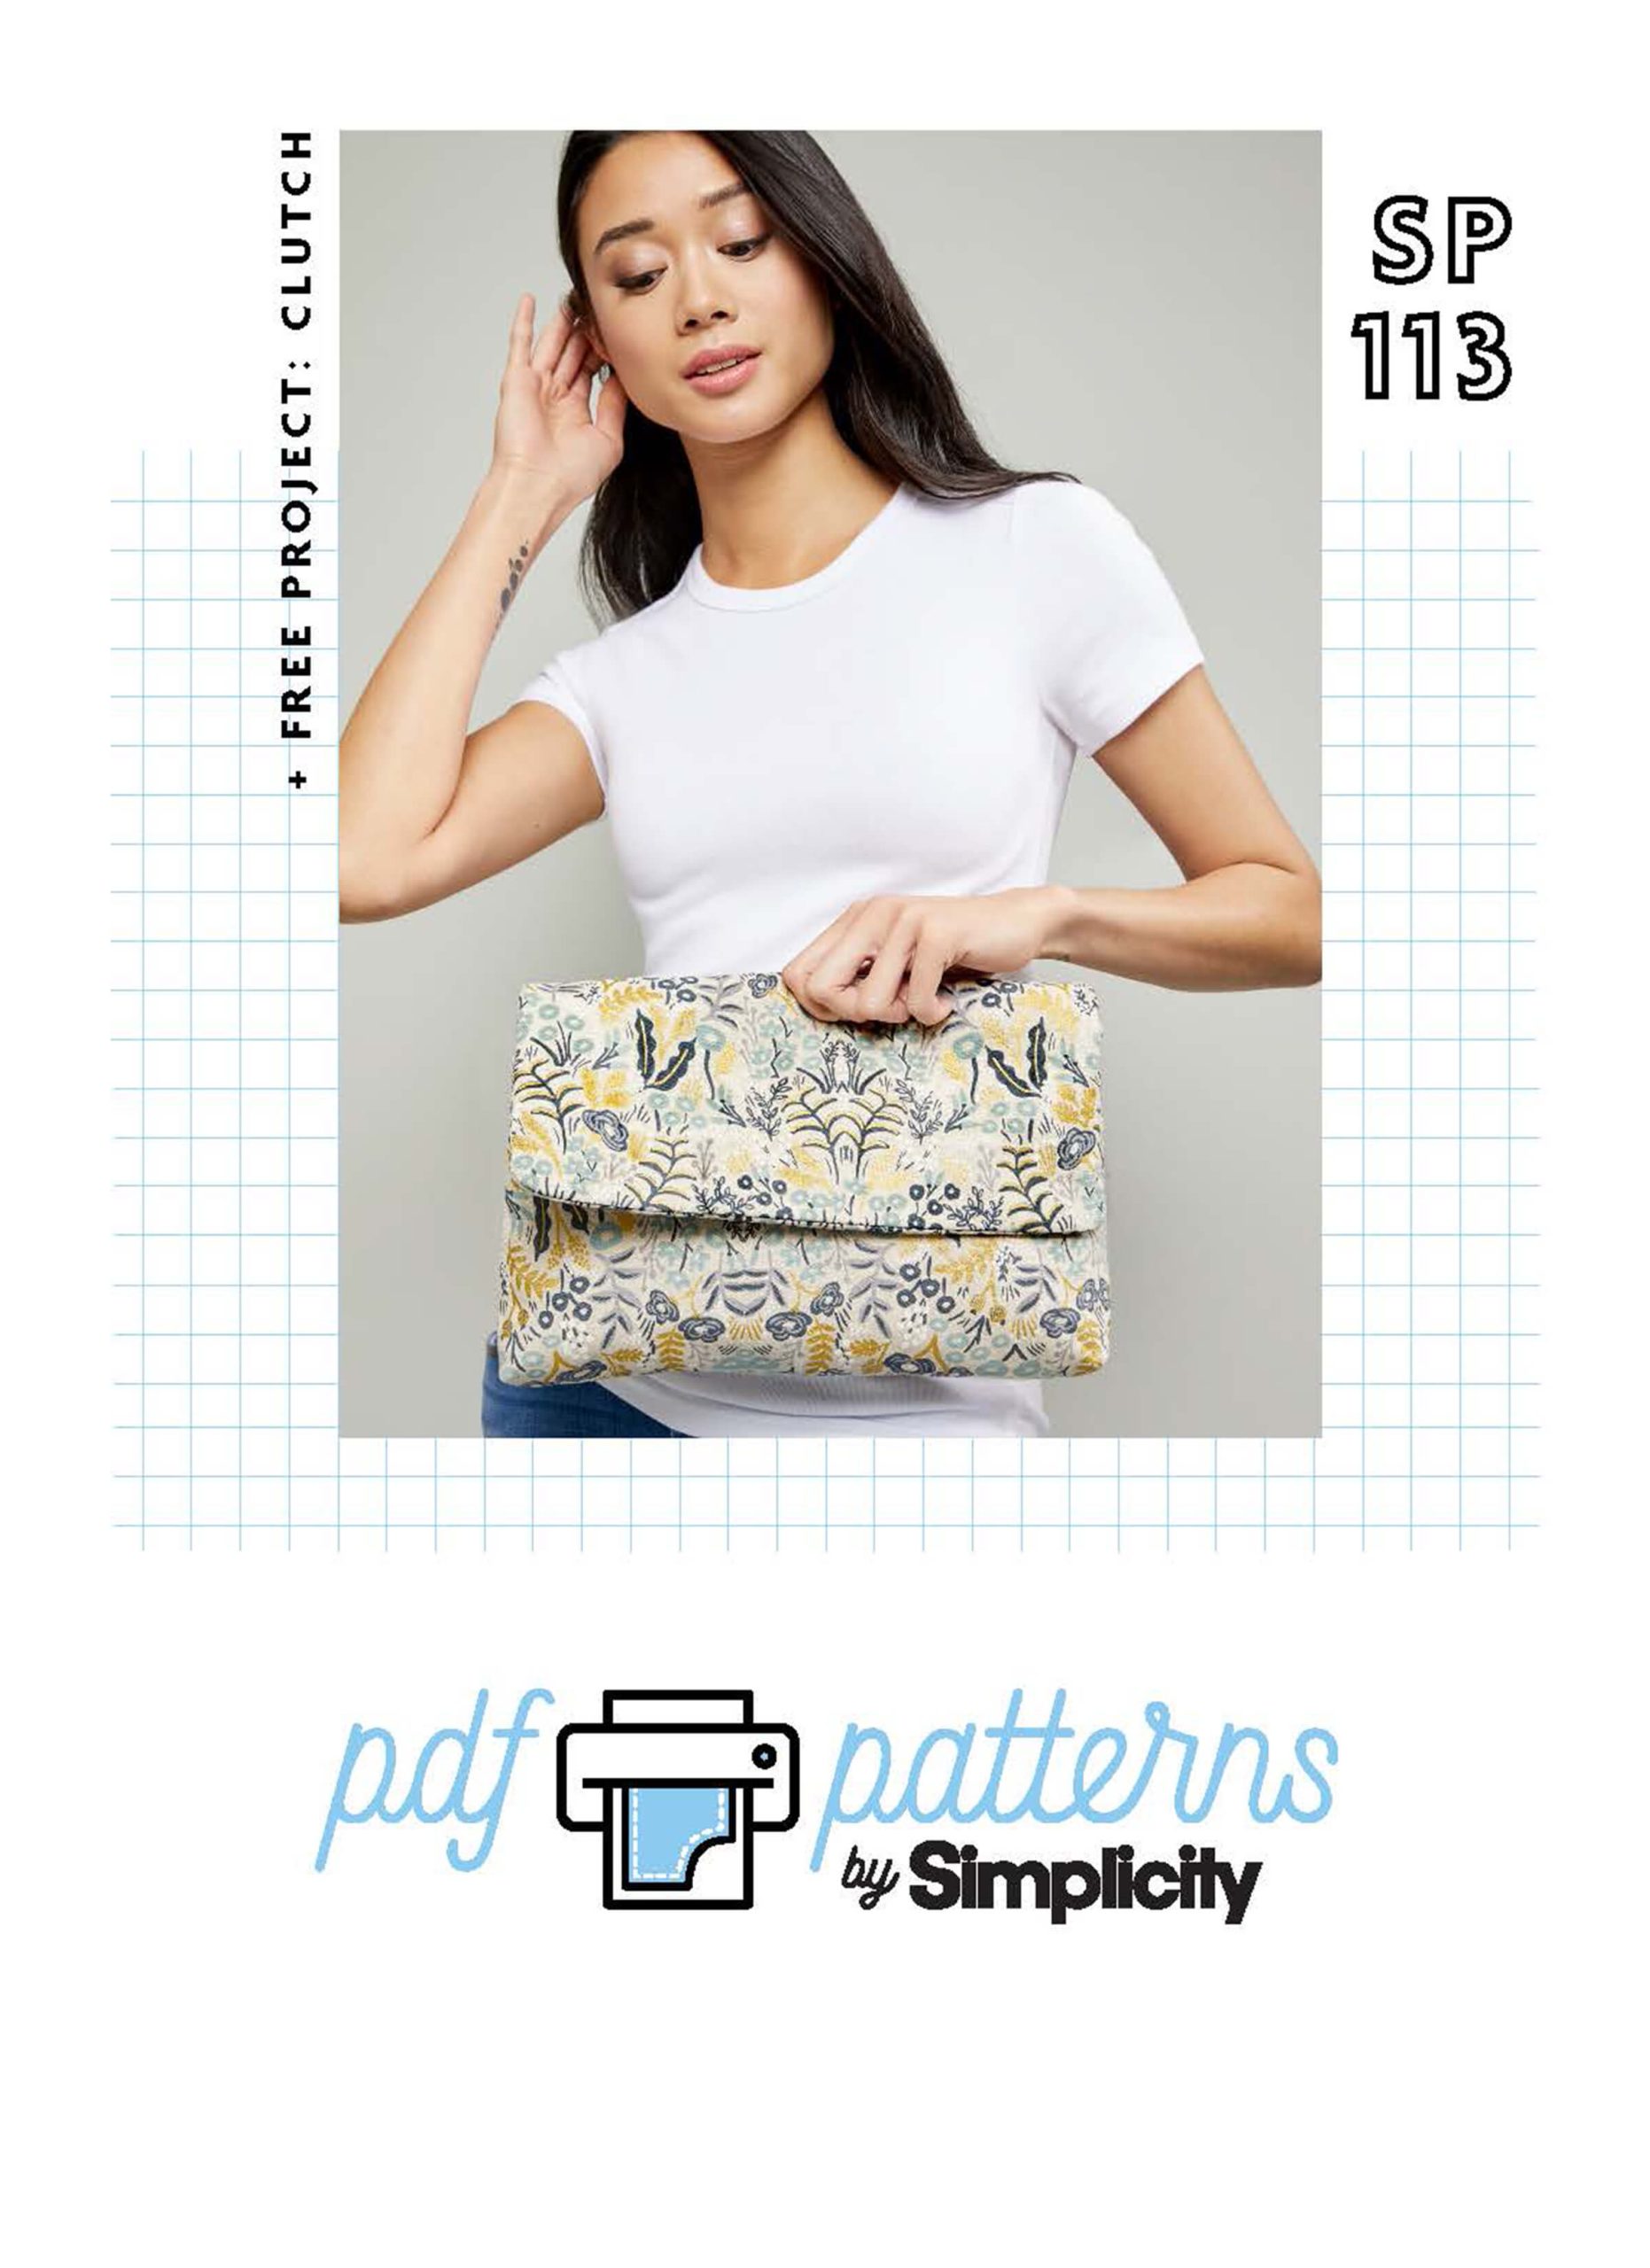 Simplicity PDF Sewing Pattern SP113 Free Download Clutch Bag